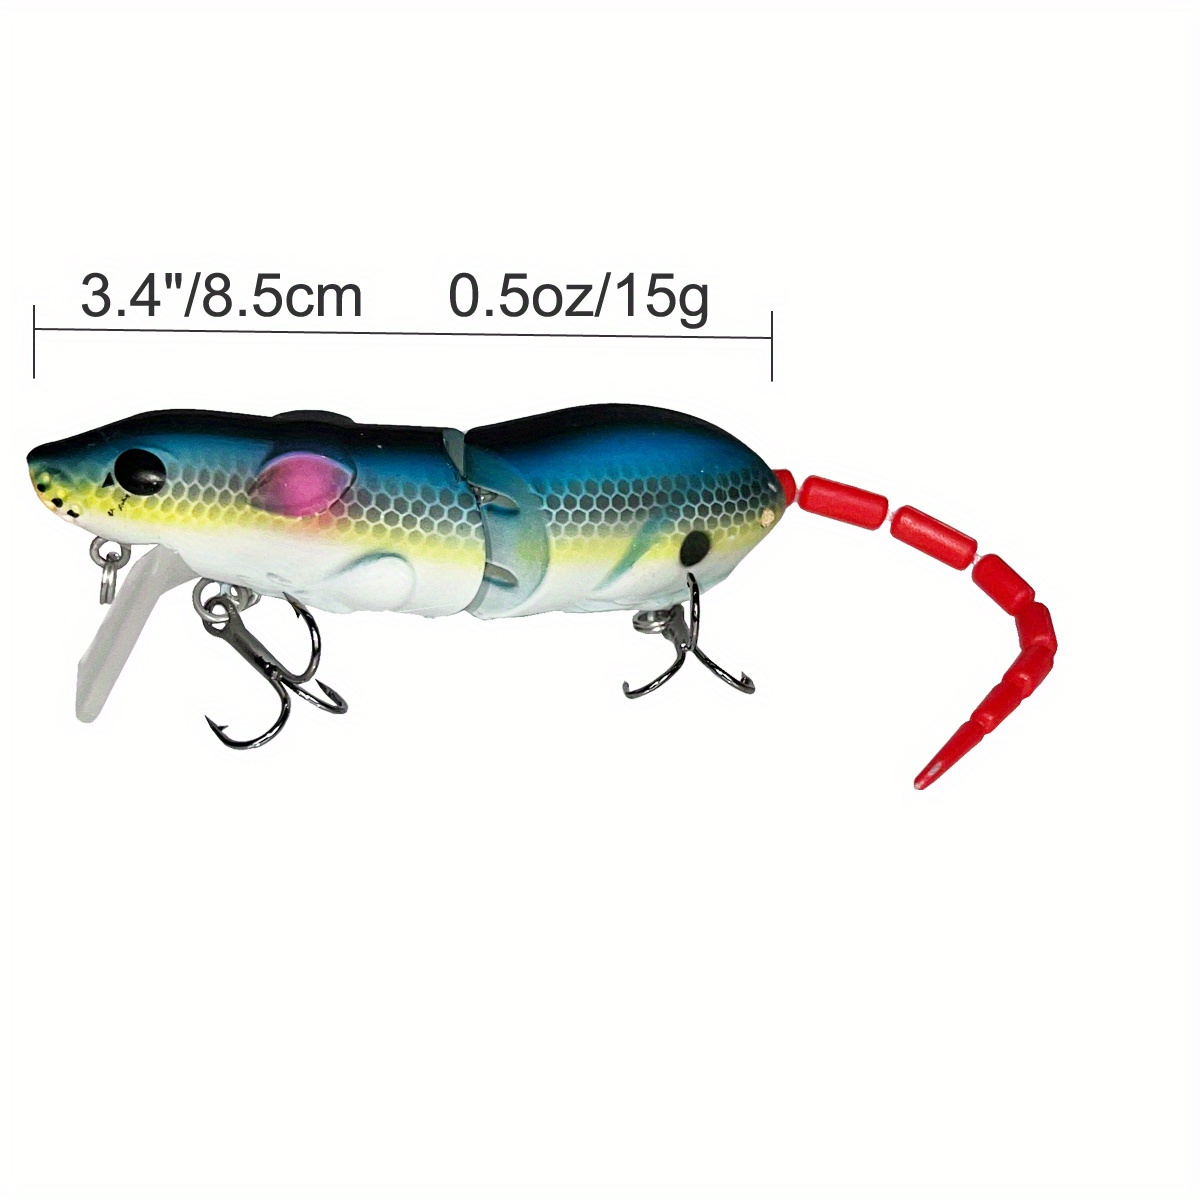 5x Multi-Section Laser Rat Bats Mouse Bass Fishing Lures Sinking  16.3g/8.5cm